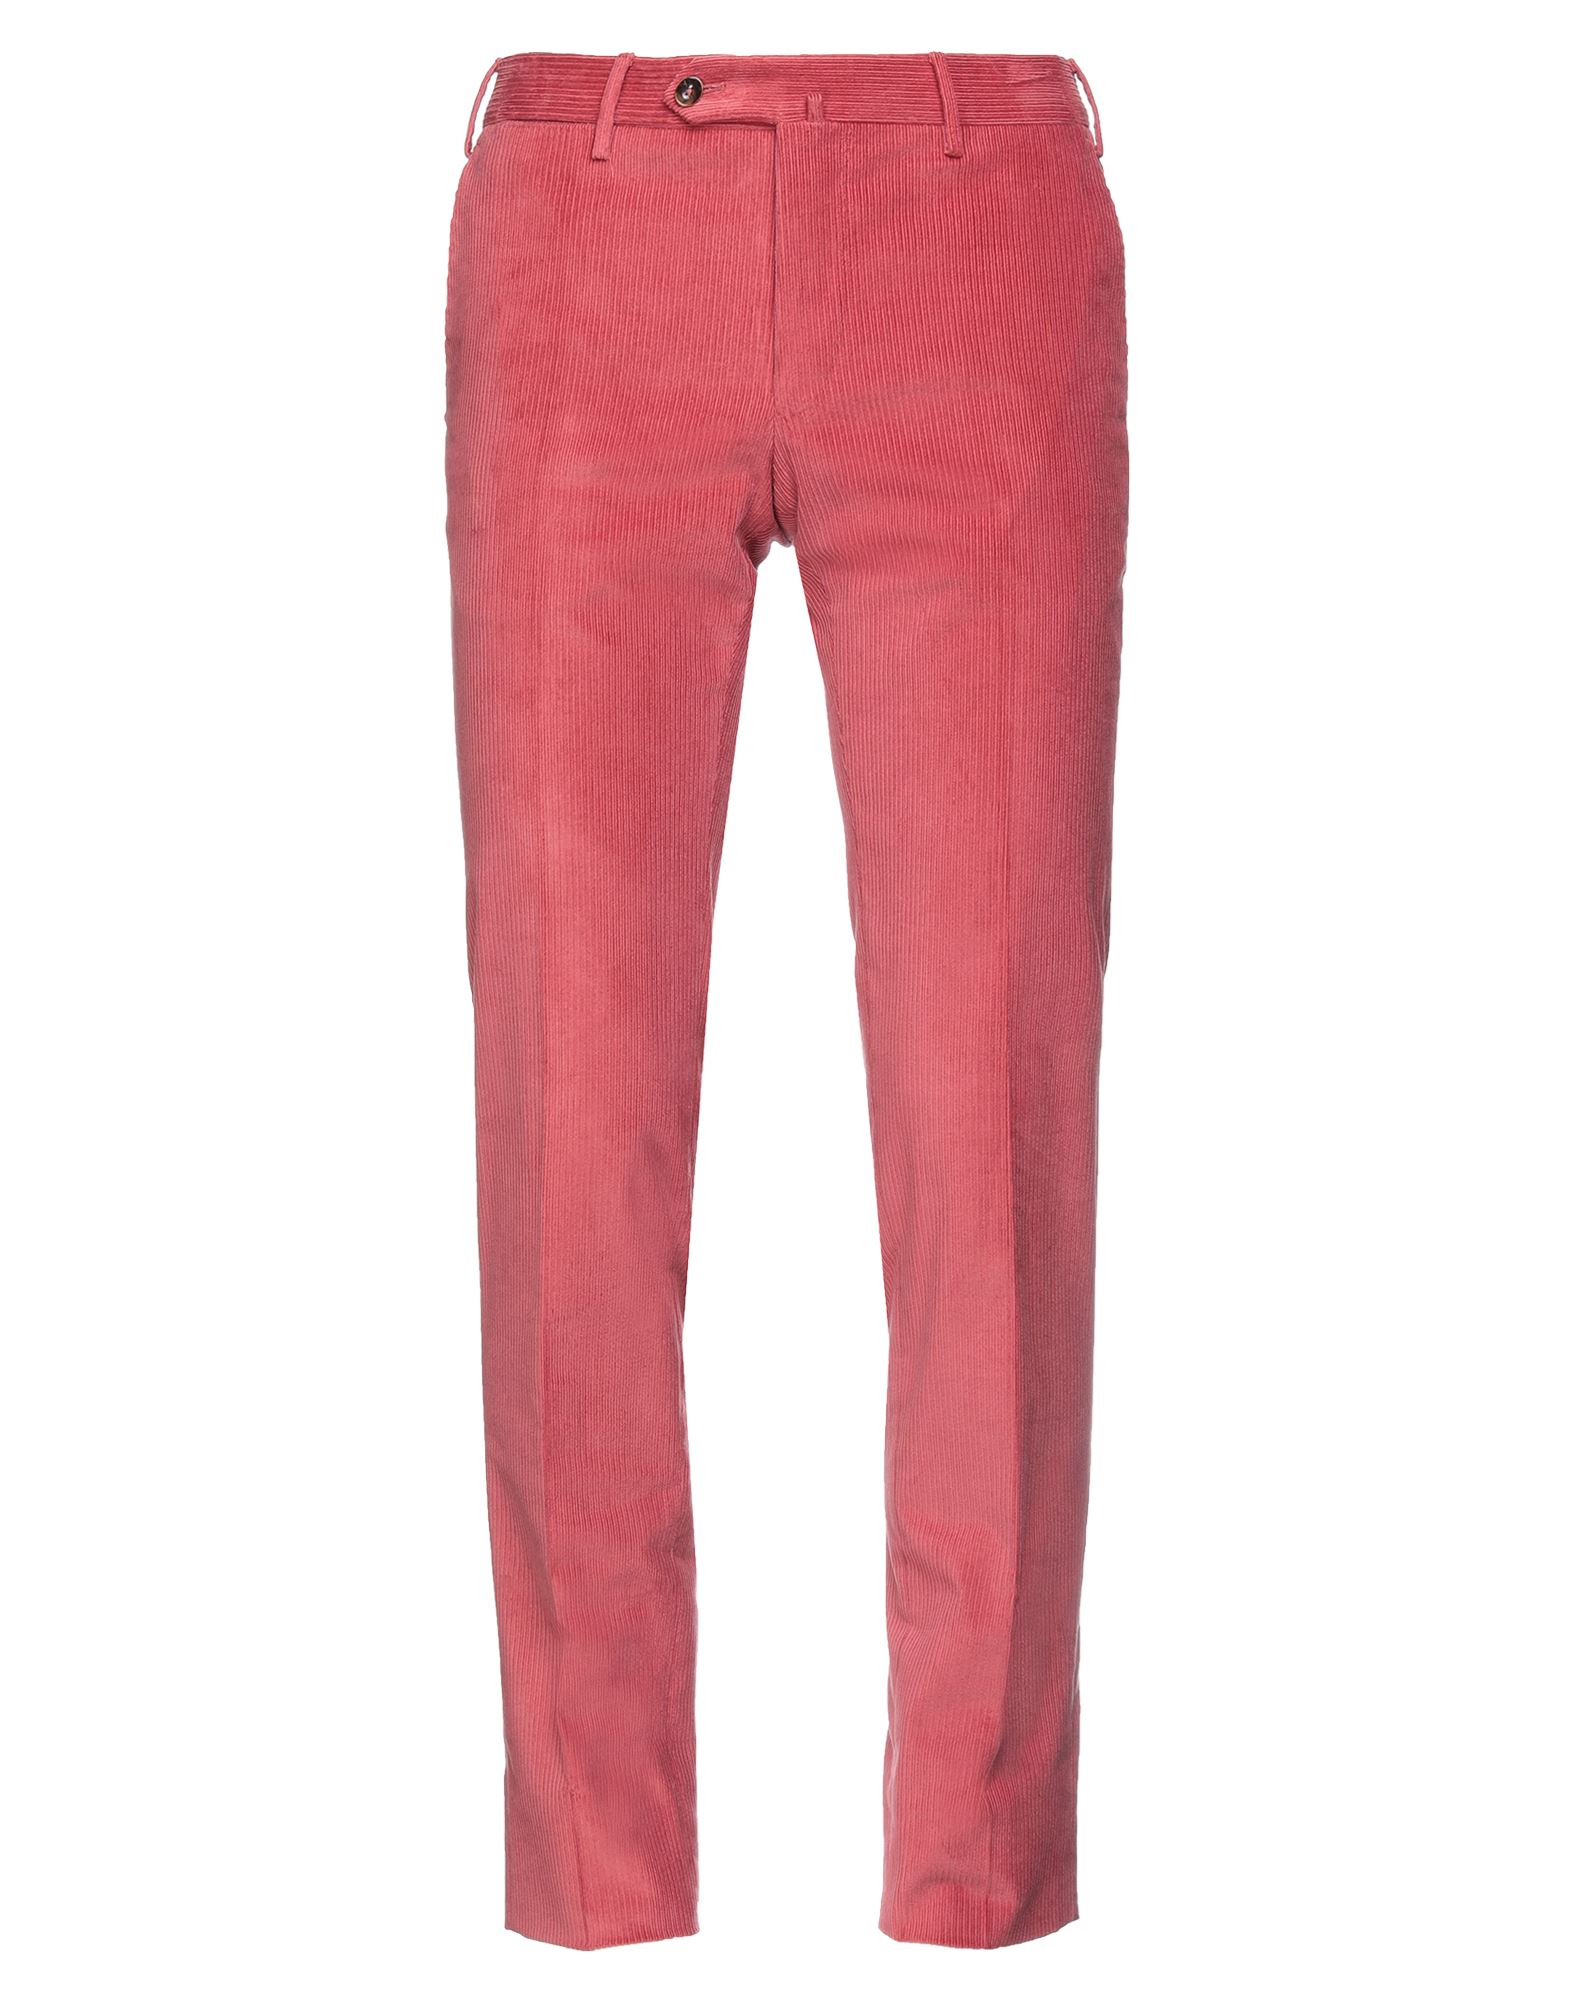 Pt Torino Pants In Coral